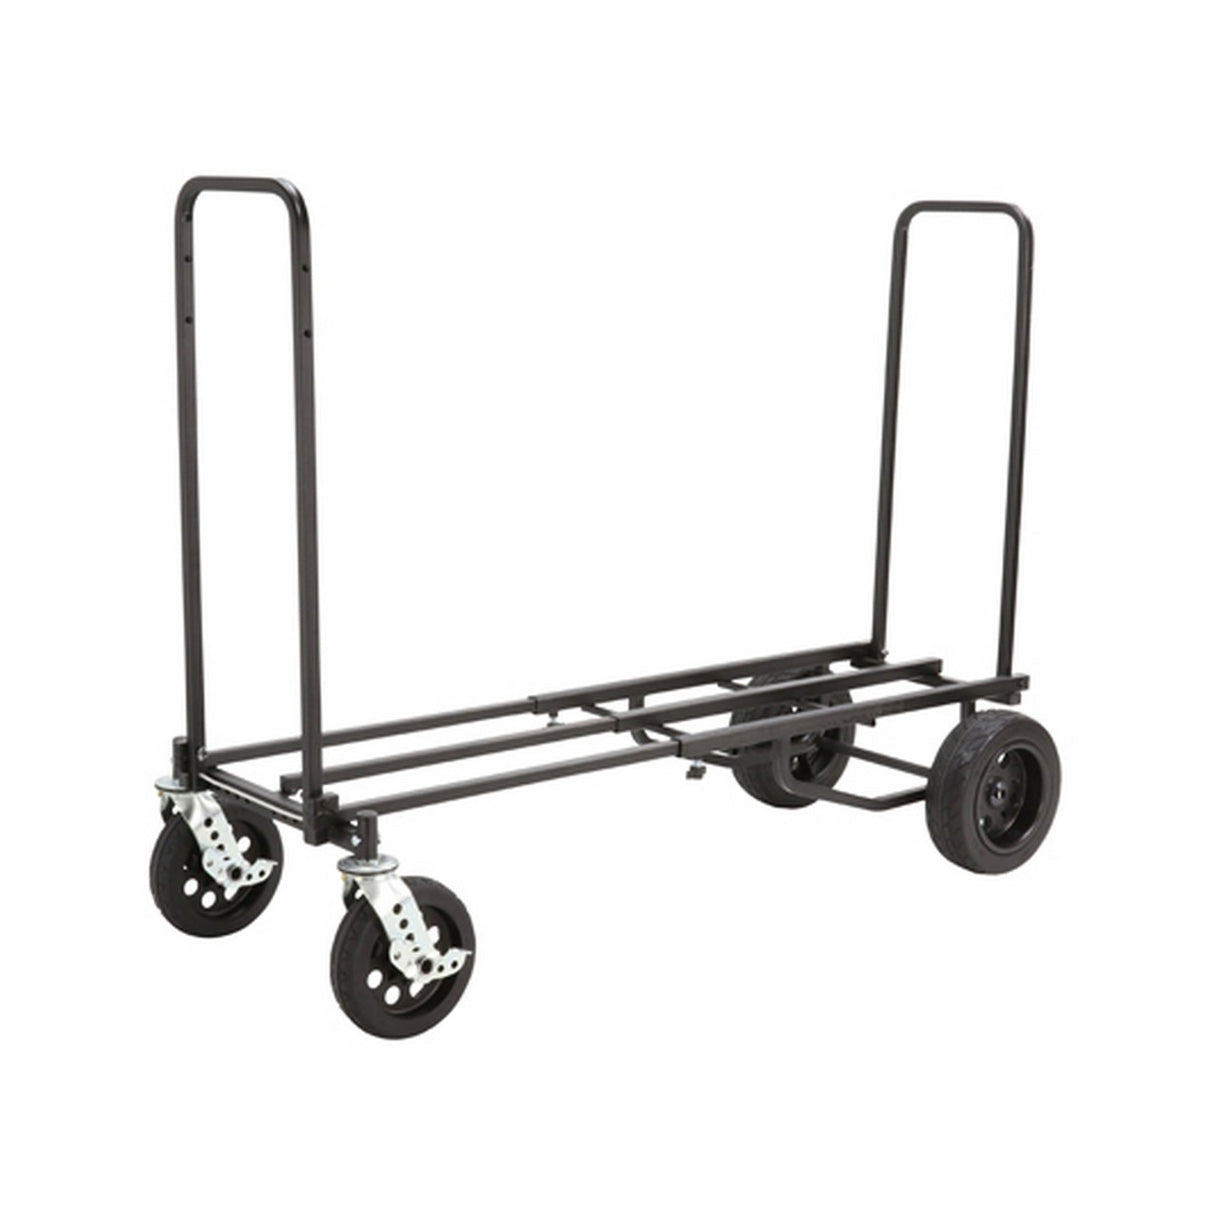 Odyssey Cases OR12STEALTH | Rock N Roller Multi Cart 8-In-1 Equipment Cart